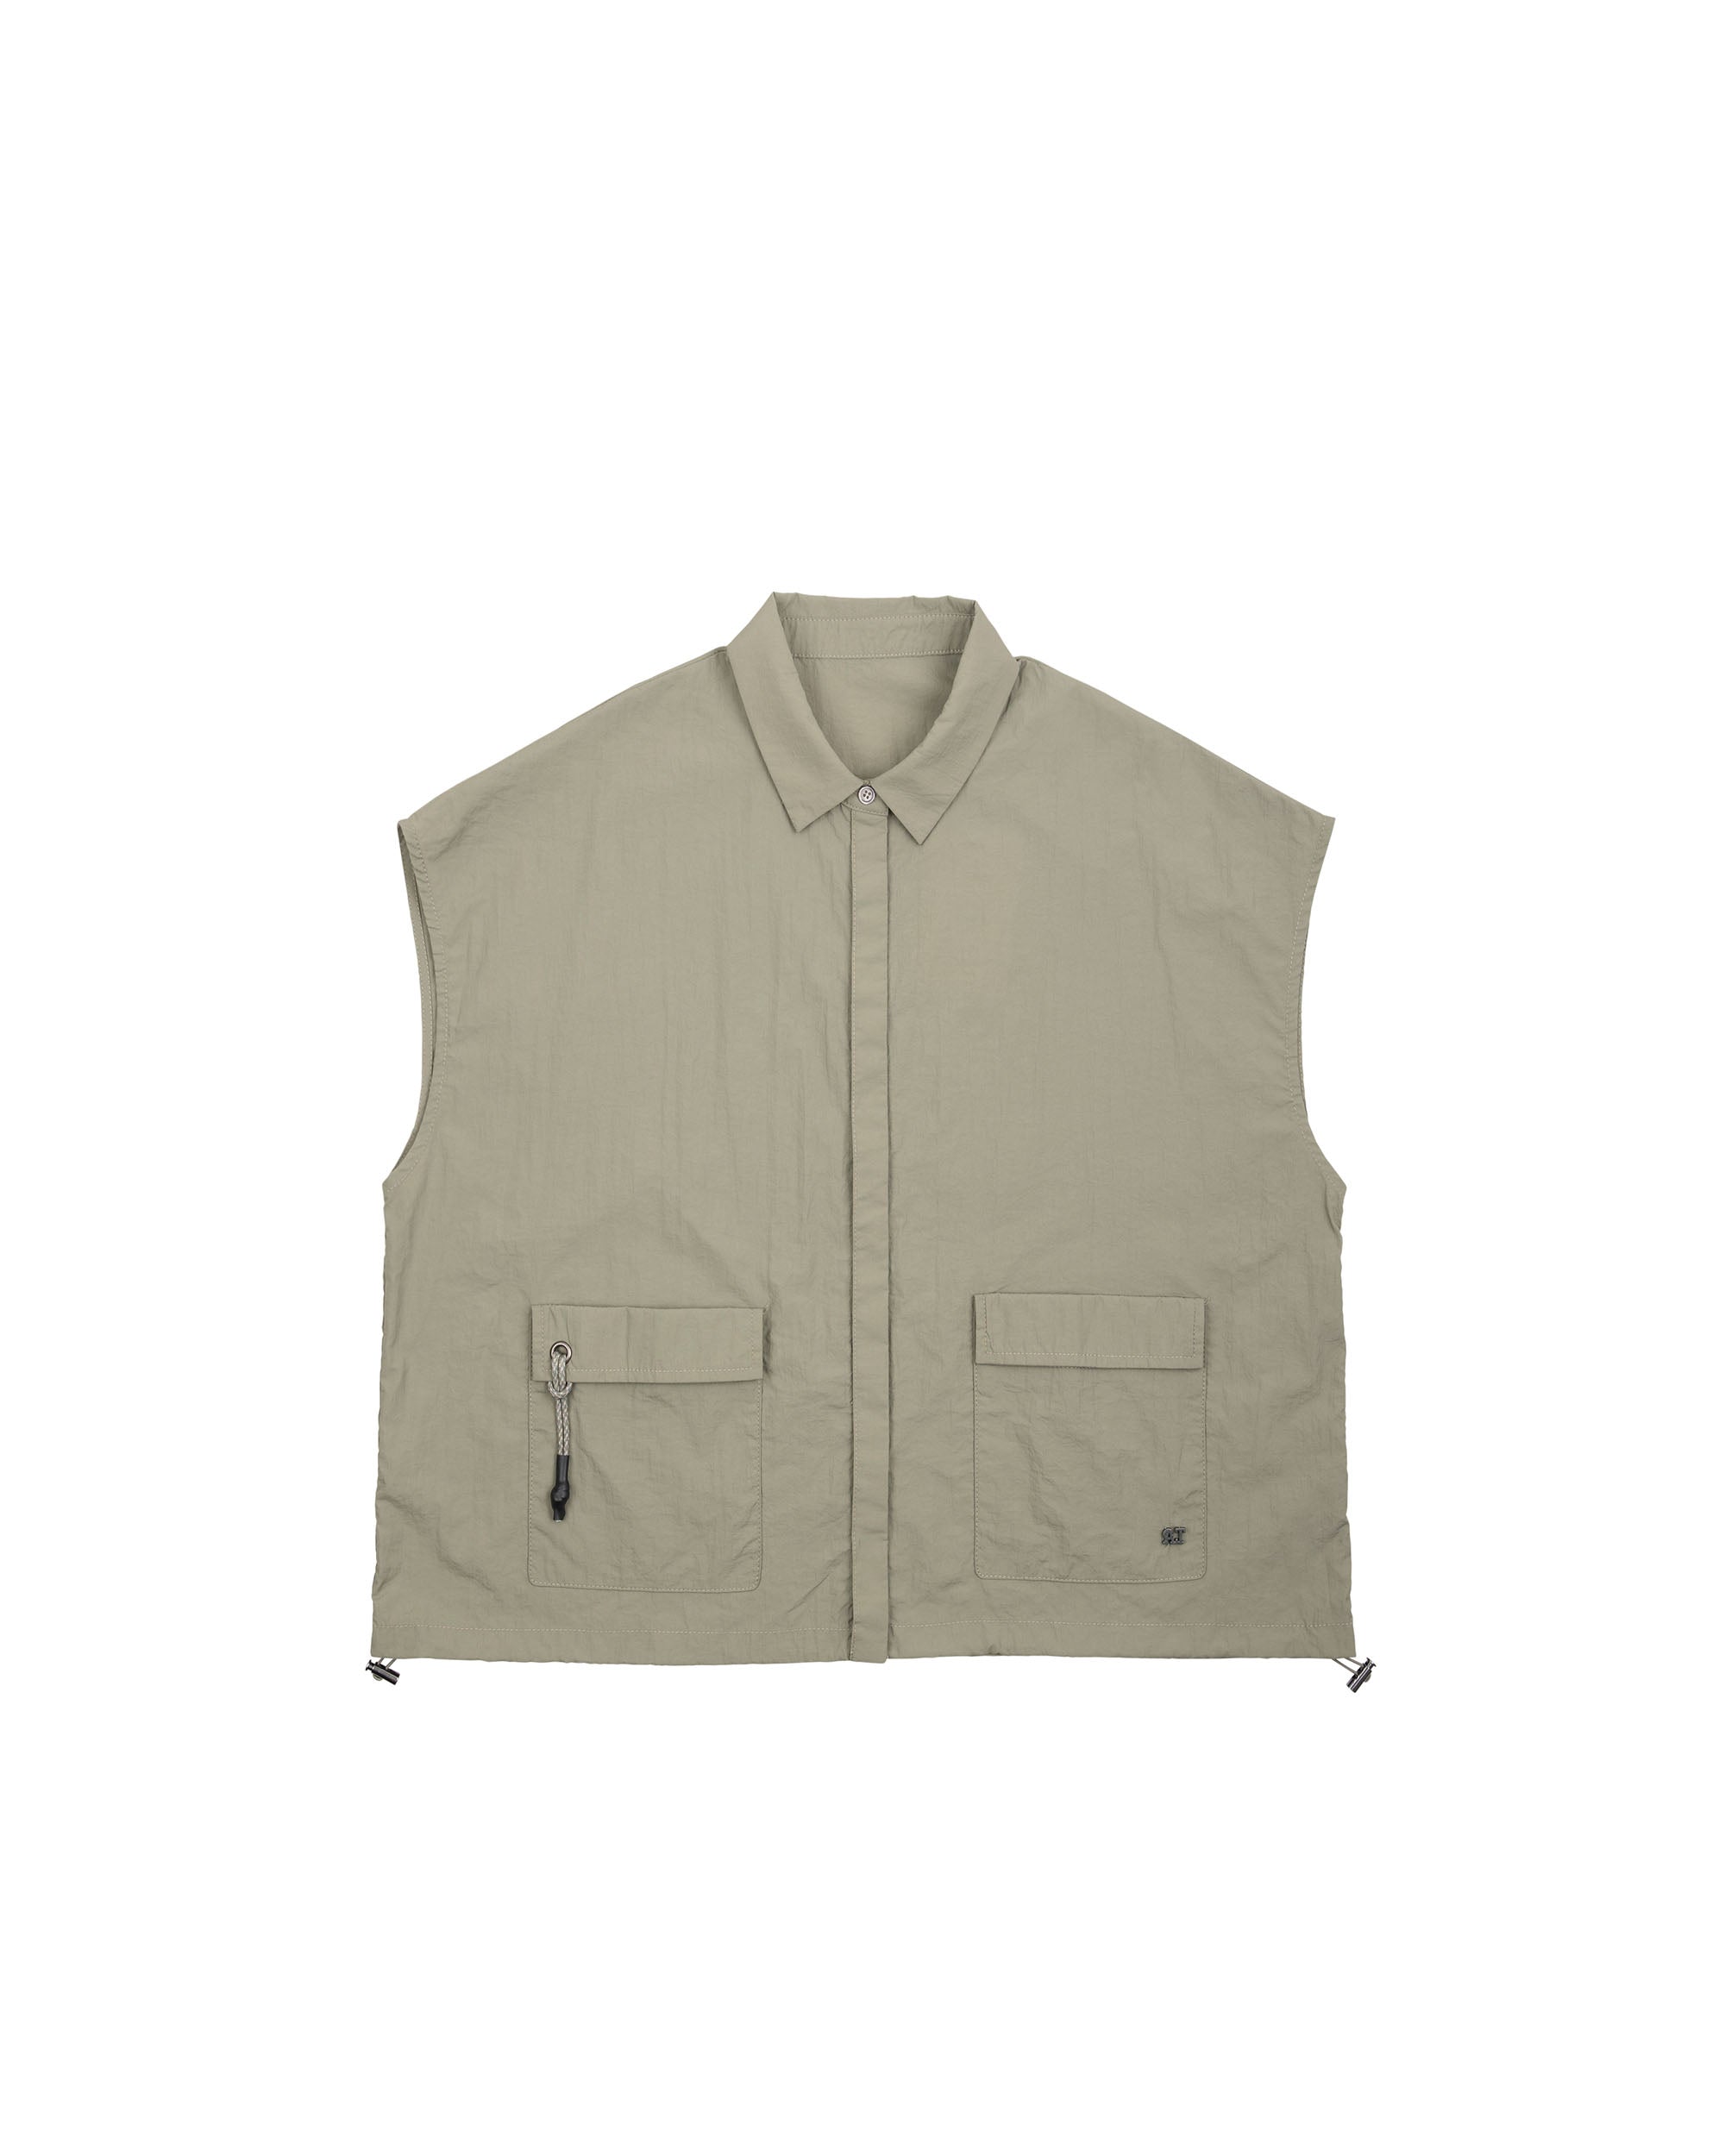 A.T OUTDOOR Nylon 2 Pocket Button Up Blouse